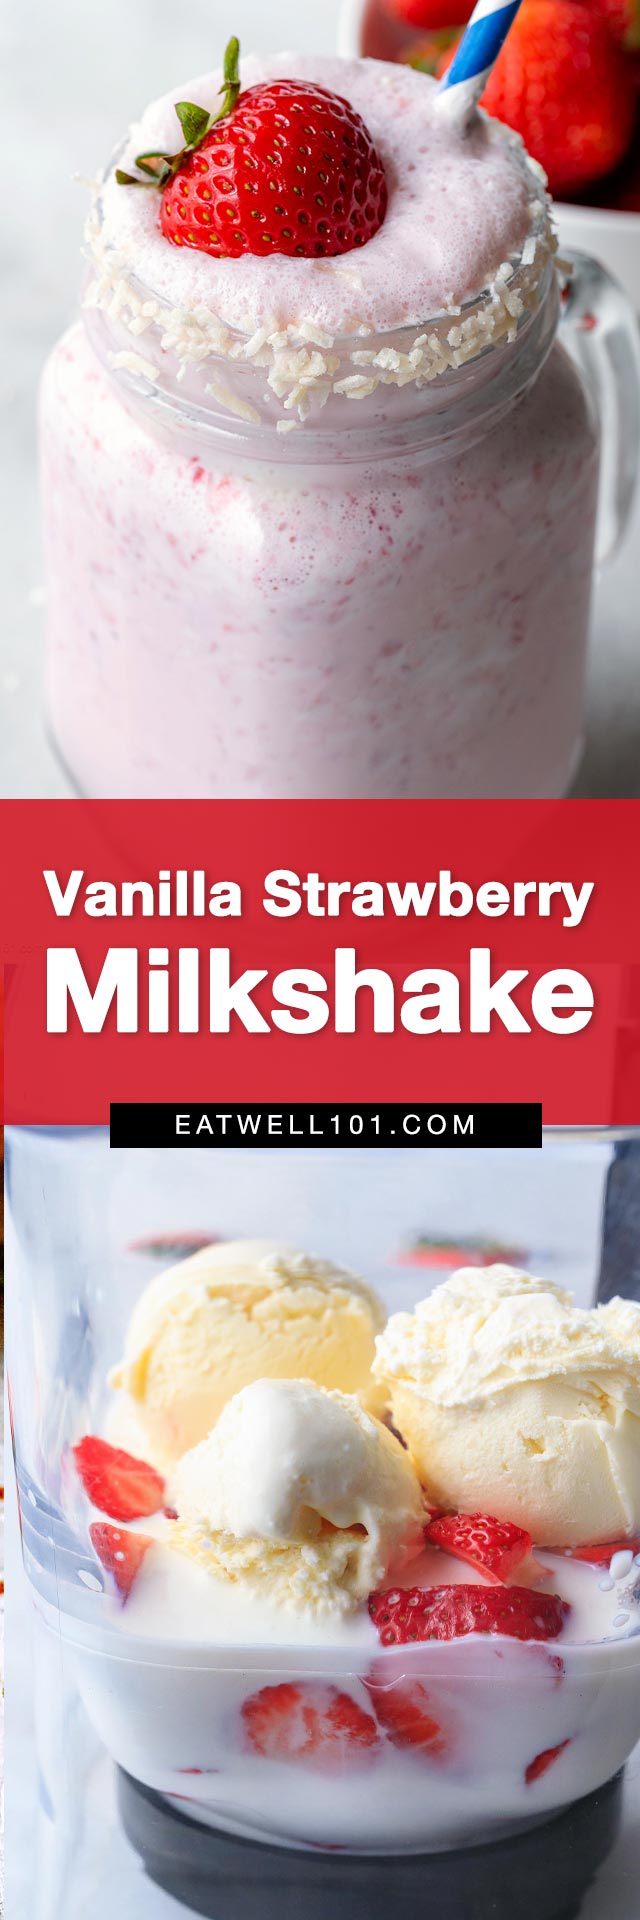 Vanilla Strawberry Milkshake Recipe - #vanilla #strawberry #milkshake #recipe #eatwell101 - This quick and easy vanilla strawberry milkshake is beautifully pink, frosty, and takes just minutes to whip together!